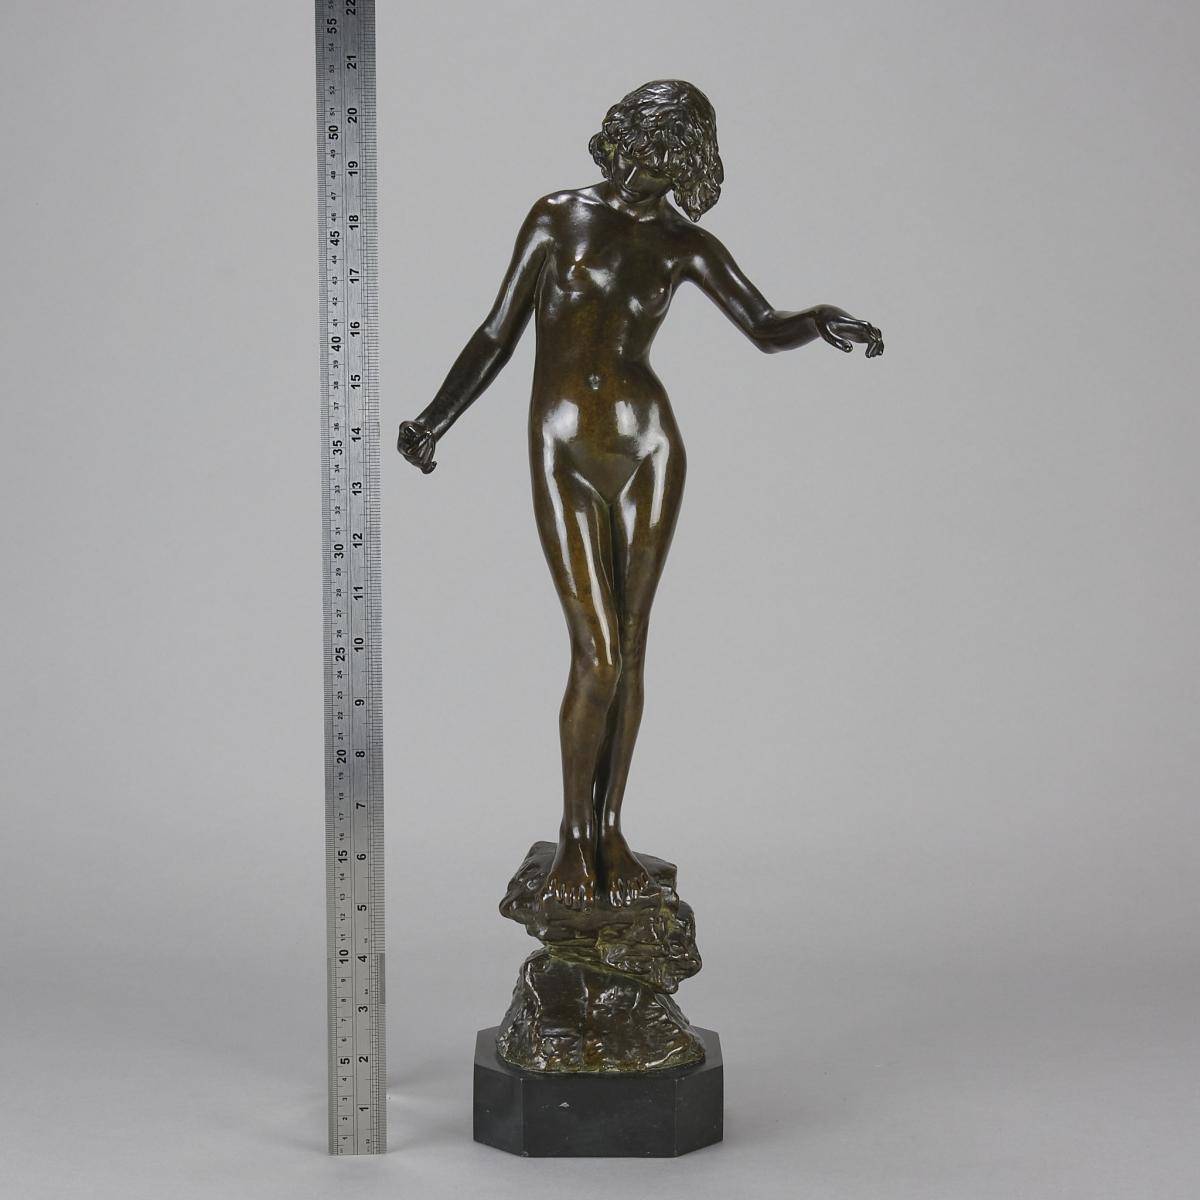  Early 20th Century Art Nouveau Bronze sculpture entitled "Folly" by Onslow Ford